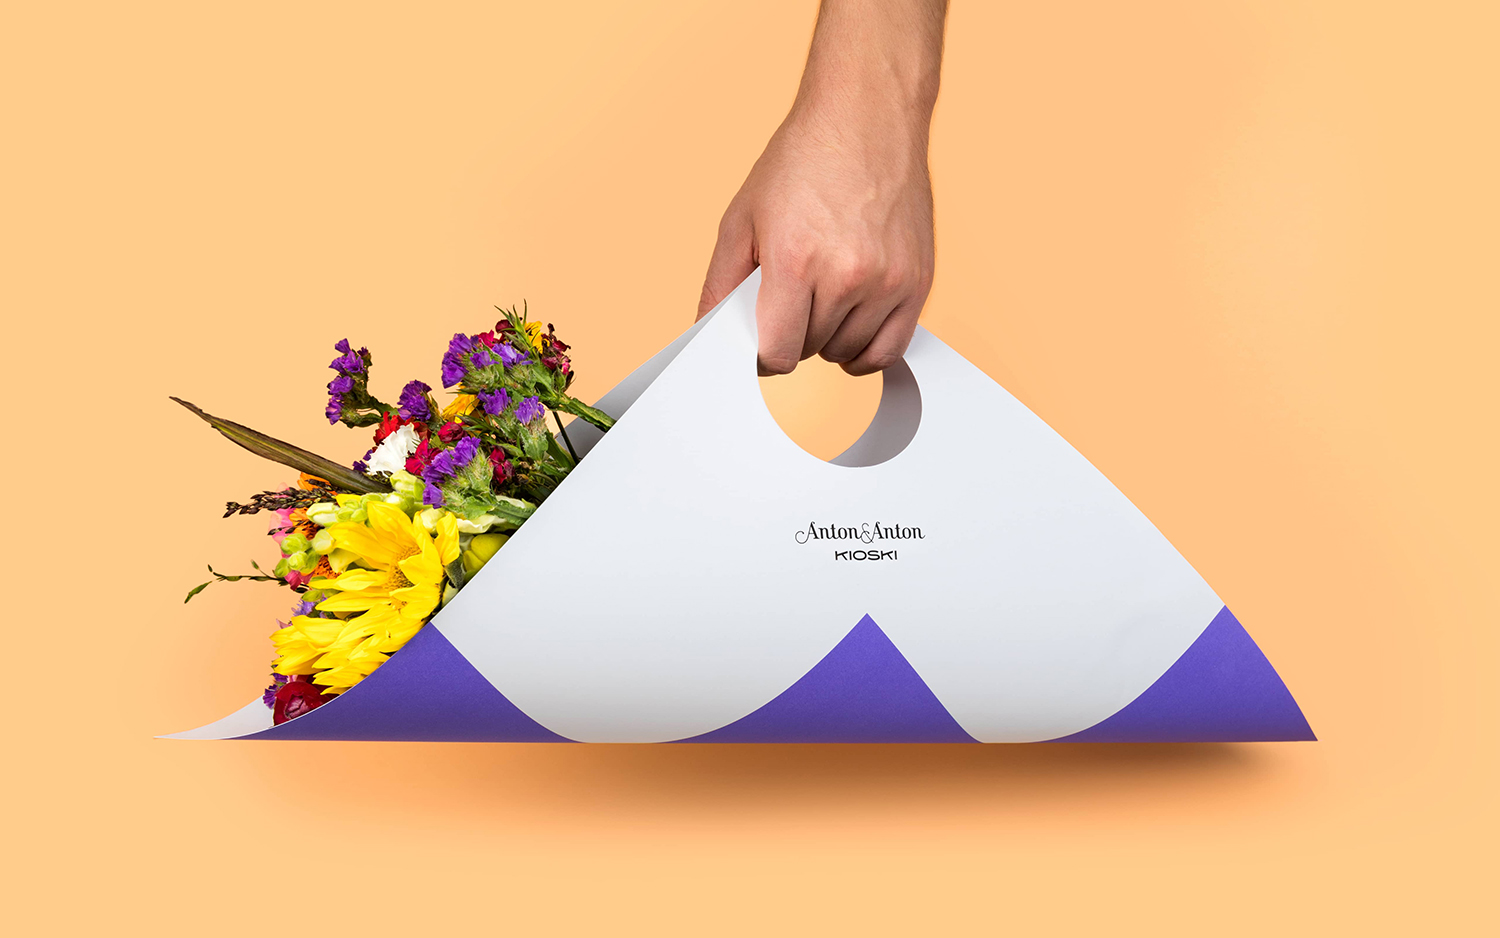 New visual identity and packaging design by Bond for Finnish supermarket and delivery service Anton&Anton Kiosk